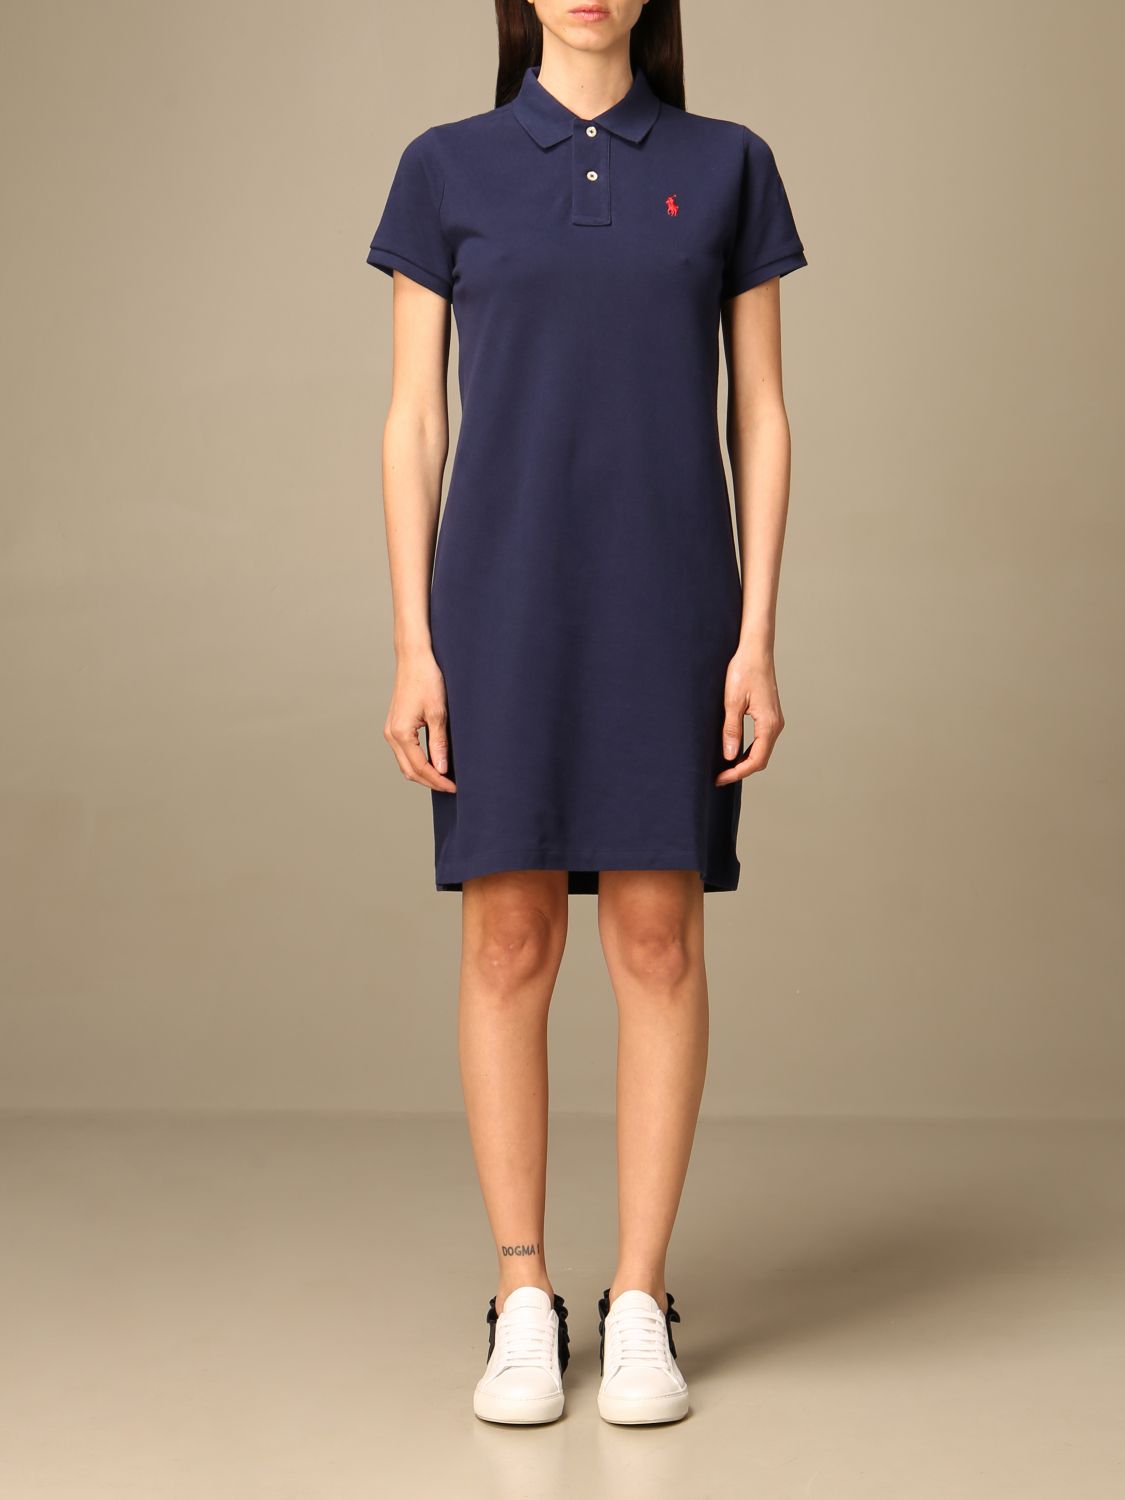 Owl human resources Competitive POLO RALPH LAUREN: short dress with logo - Blue | Polo Ralph Lauren dress  211799490 online on GIGLIO.COM